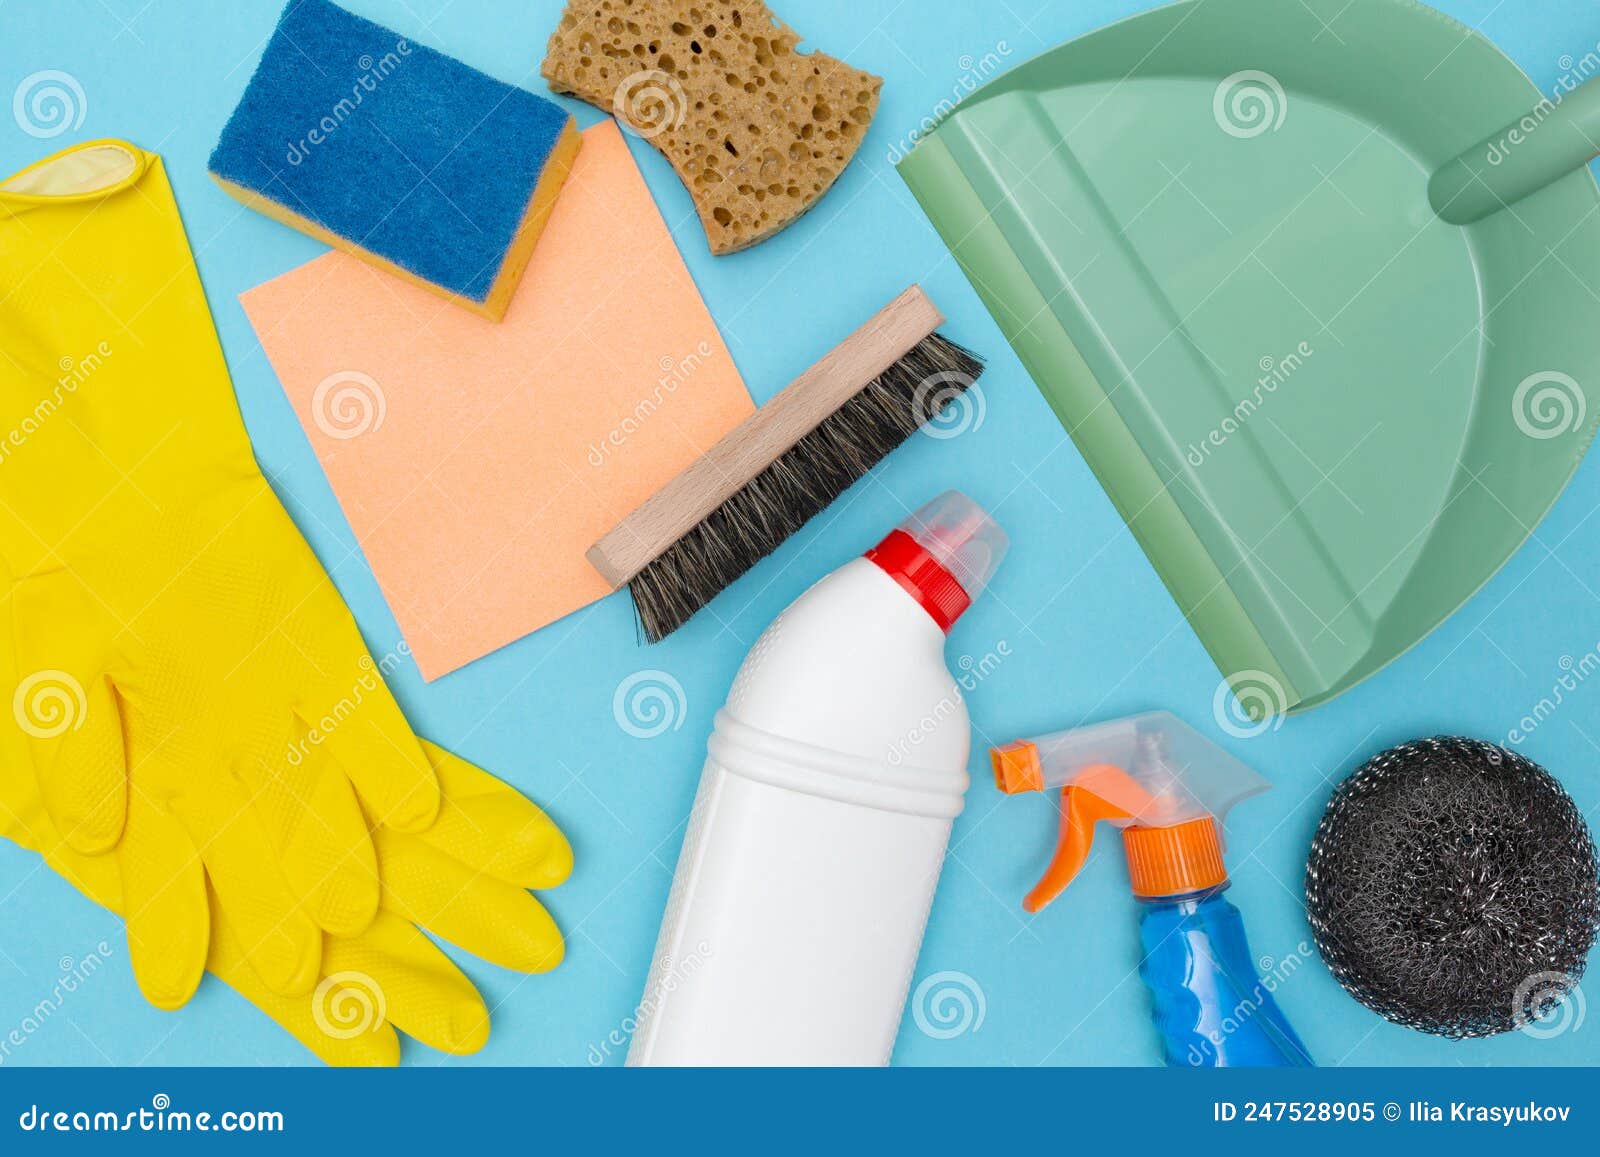 Cleaning Sponges For Kitchen Bathroom, Home & Office